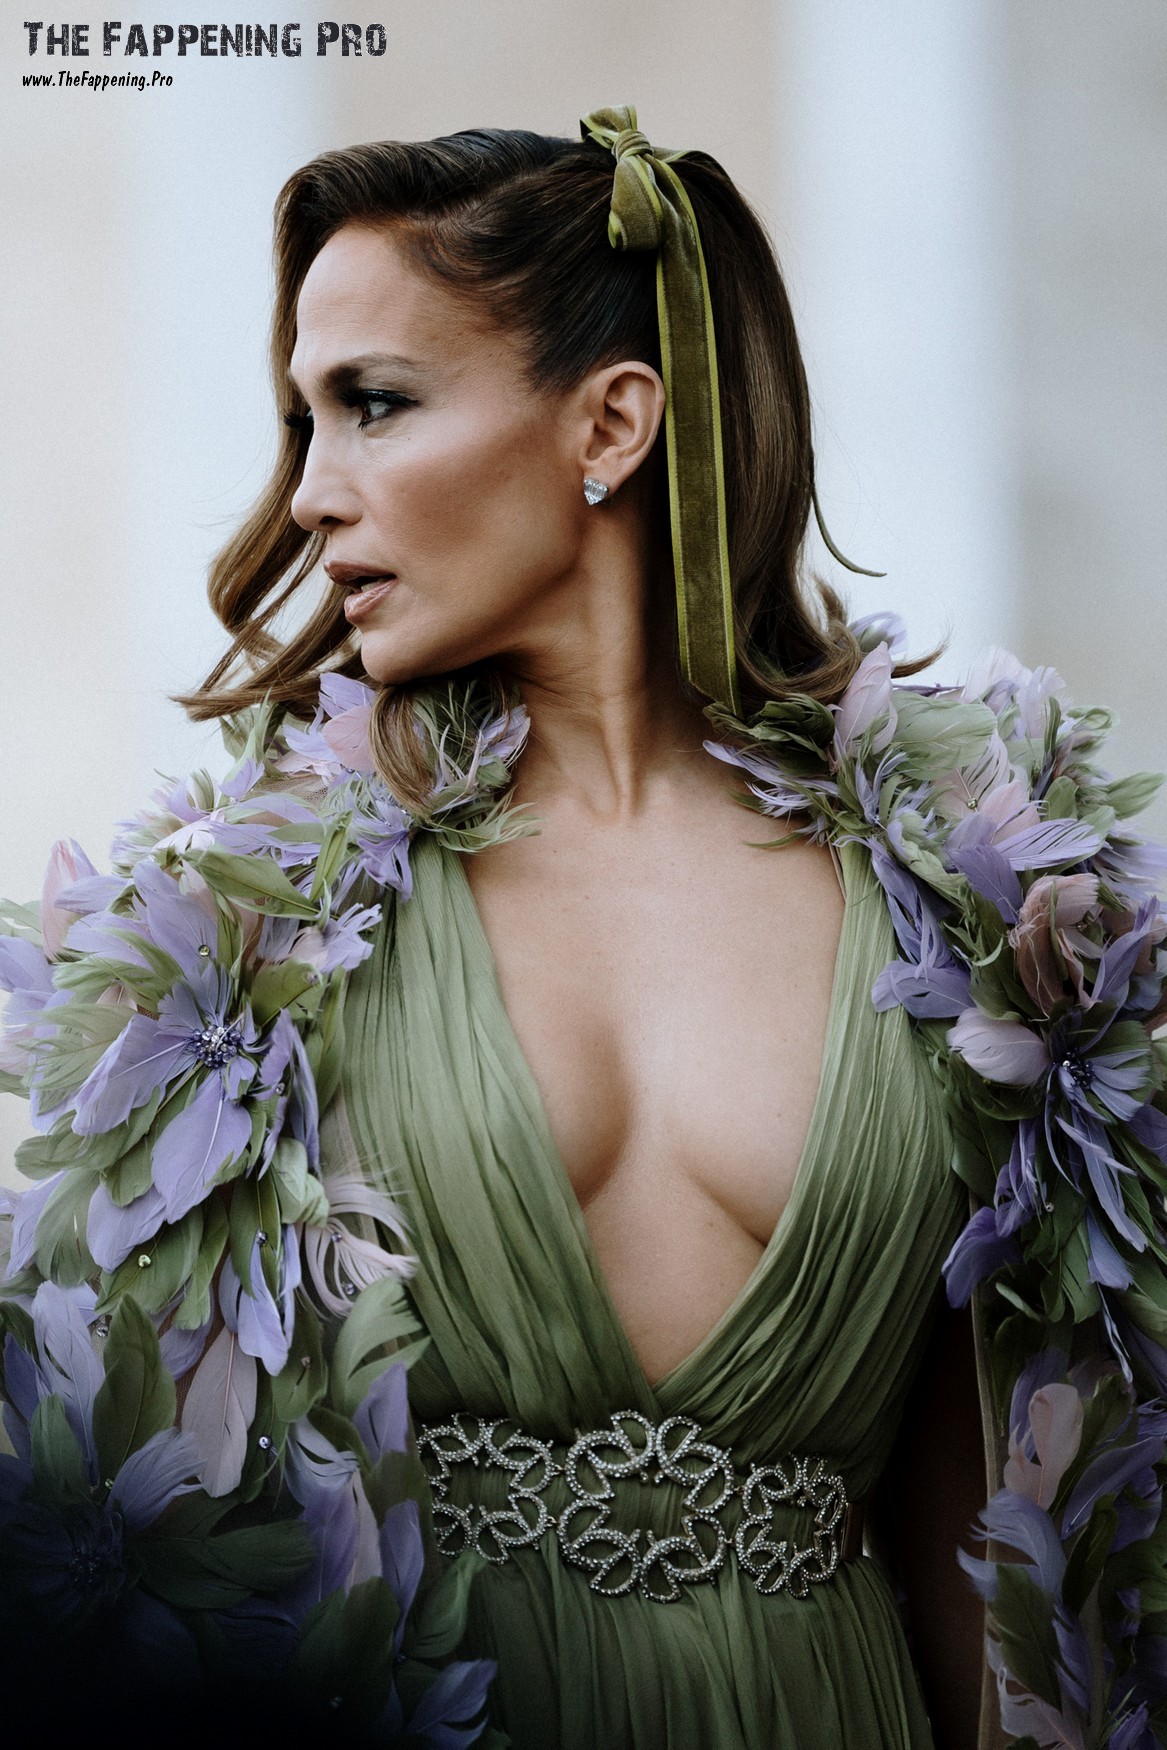 Step into the glamorous world of fashion as Jennifer Lopez steals the show at the Elie Saab Haute Couture Spring Summer 2024 show in Paris. The 54-year-old celebrity stunned everyone with her bold outfit, featuring a deep cleavage that showcased her enviable curves. Fans couldn't stop talking about J Lo's daring look, proving once again that she's not afraid to take risks when it comes to fashion. Witness the star's confidence and sex appeal as she flaunts her assets on the runway, reminding us all why she's a true icon in the industry. Get ready to be mesmerized by Jennifer Lopez's unforgettable appearance at this unforgettable event!